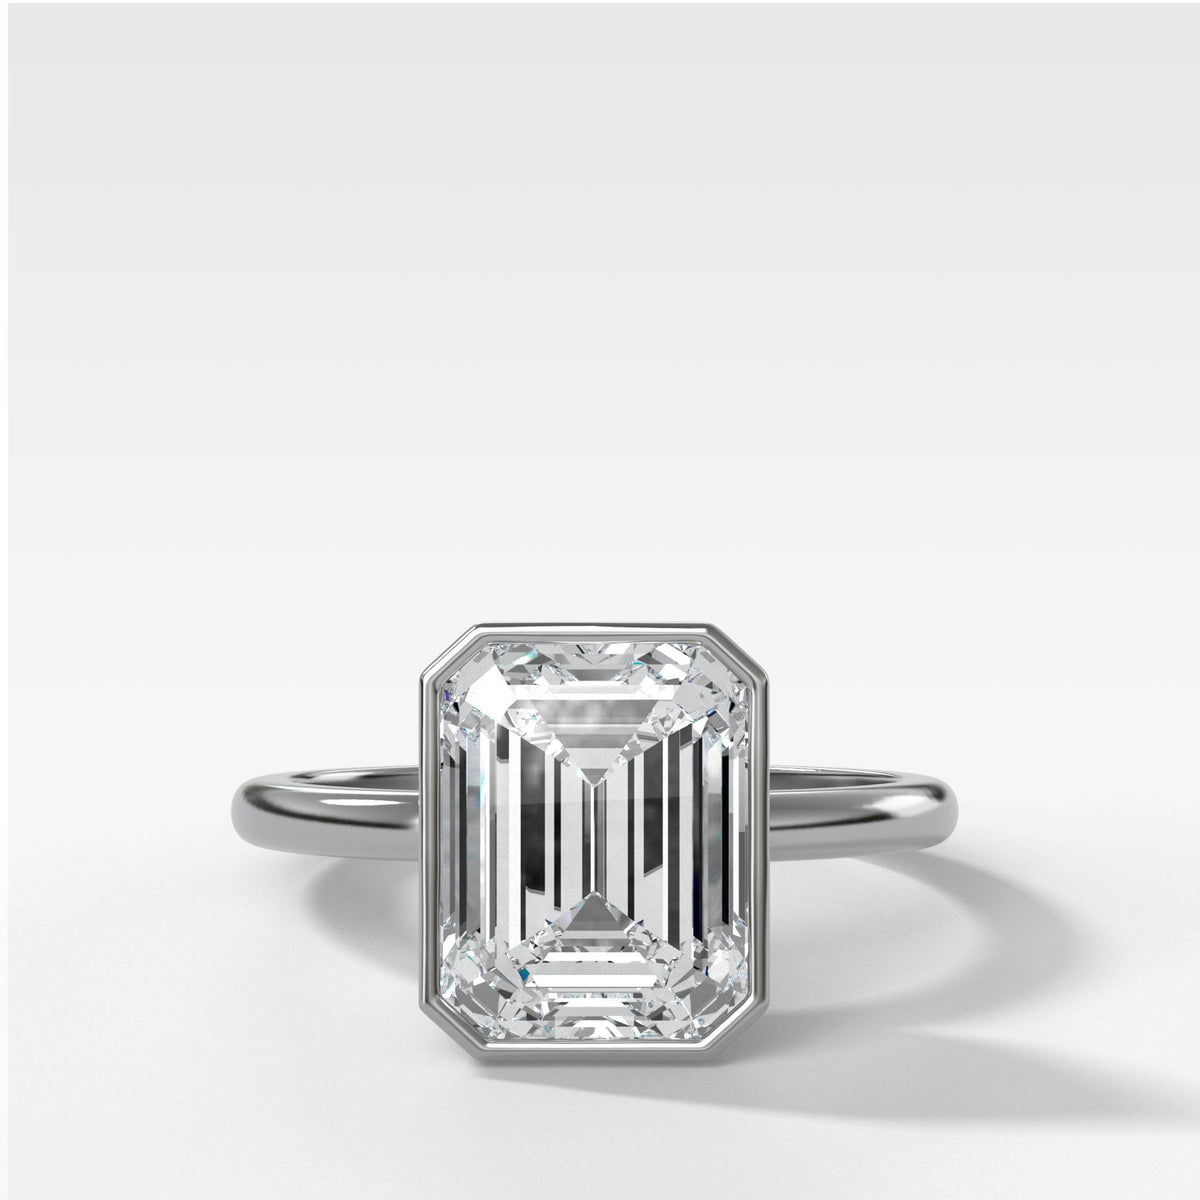 Bezel Penumbra Solitaire With Emerald Cut in White Gold by Good Stone